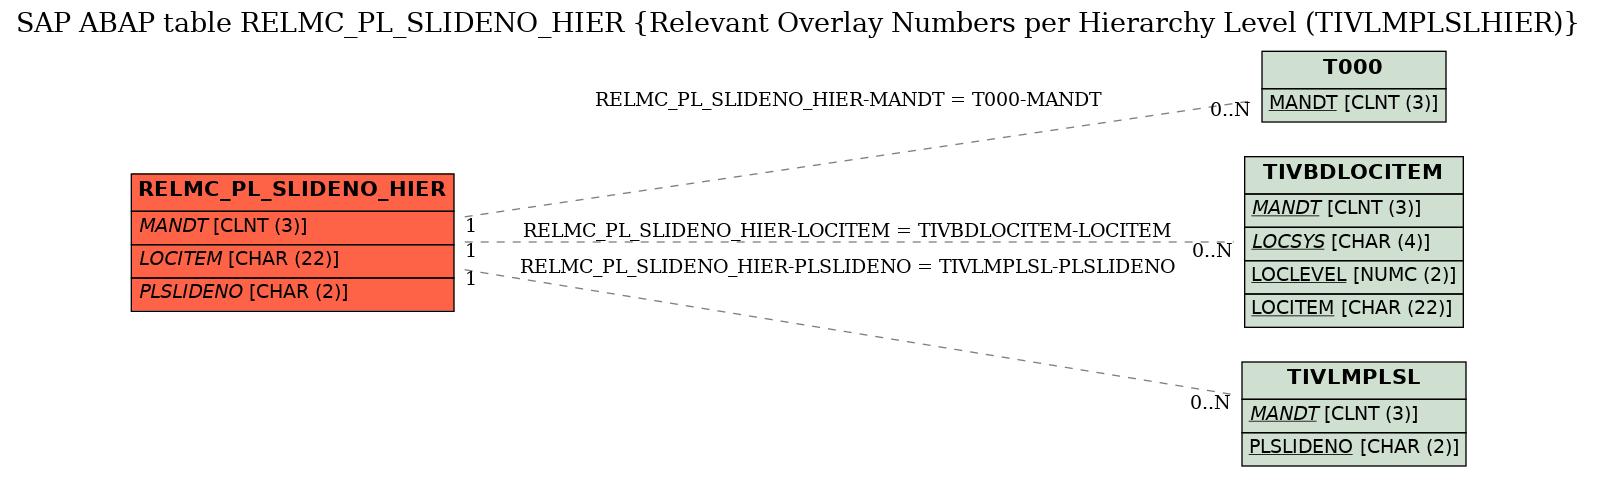 E-R Diagram for table RELMC_PL_SLIDENO_HIER (Relevant Overlay Numbers per Hierarchy Level (TIVLMPLSLHIER))